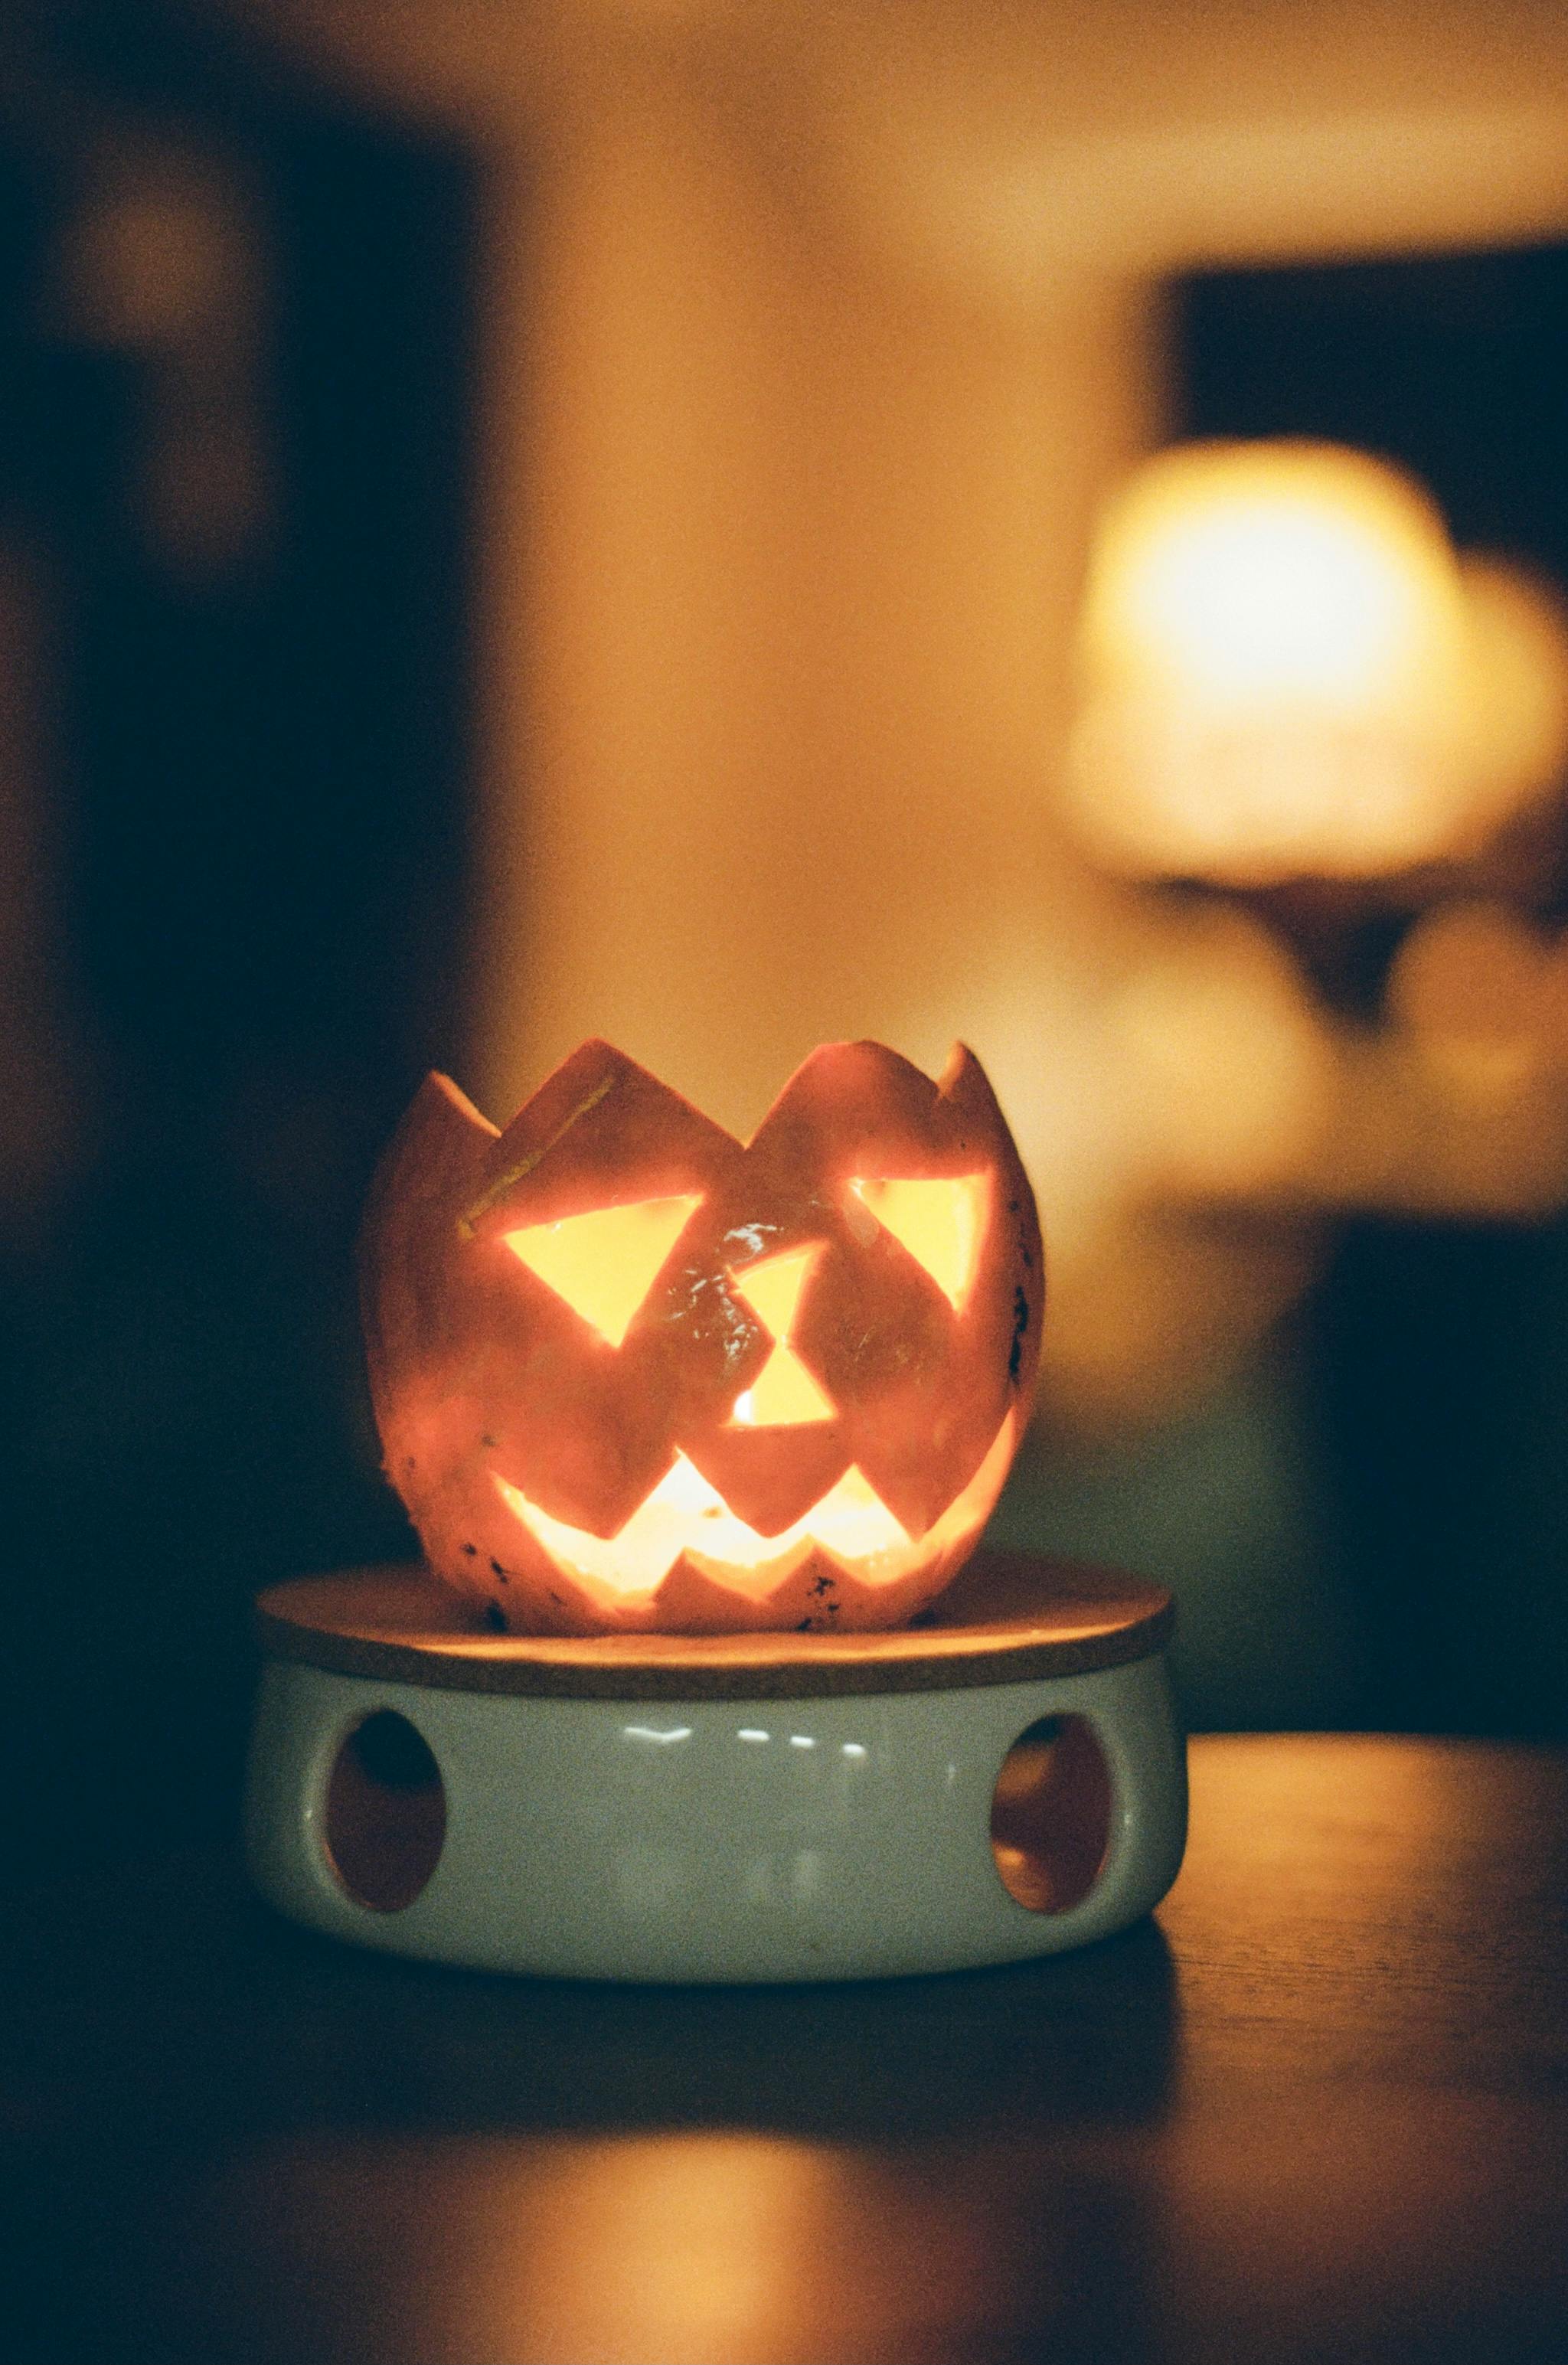 Person Holding a Toy Jack O Lantern with a Ghost · Free Stock Photo